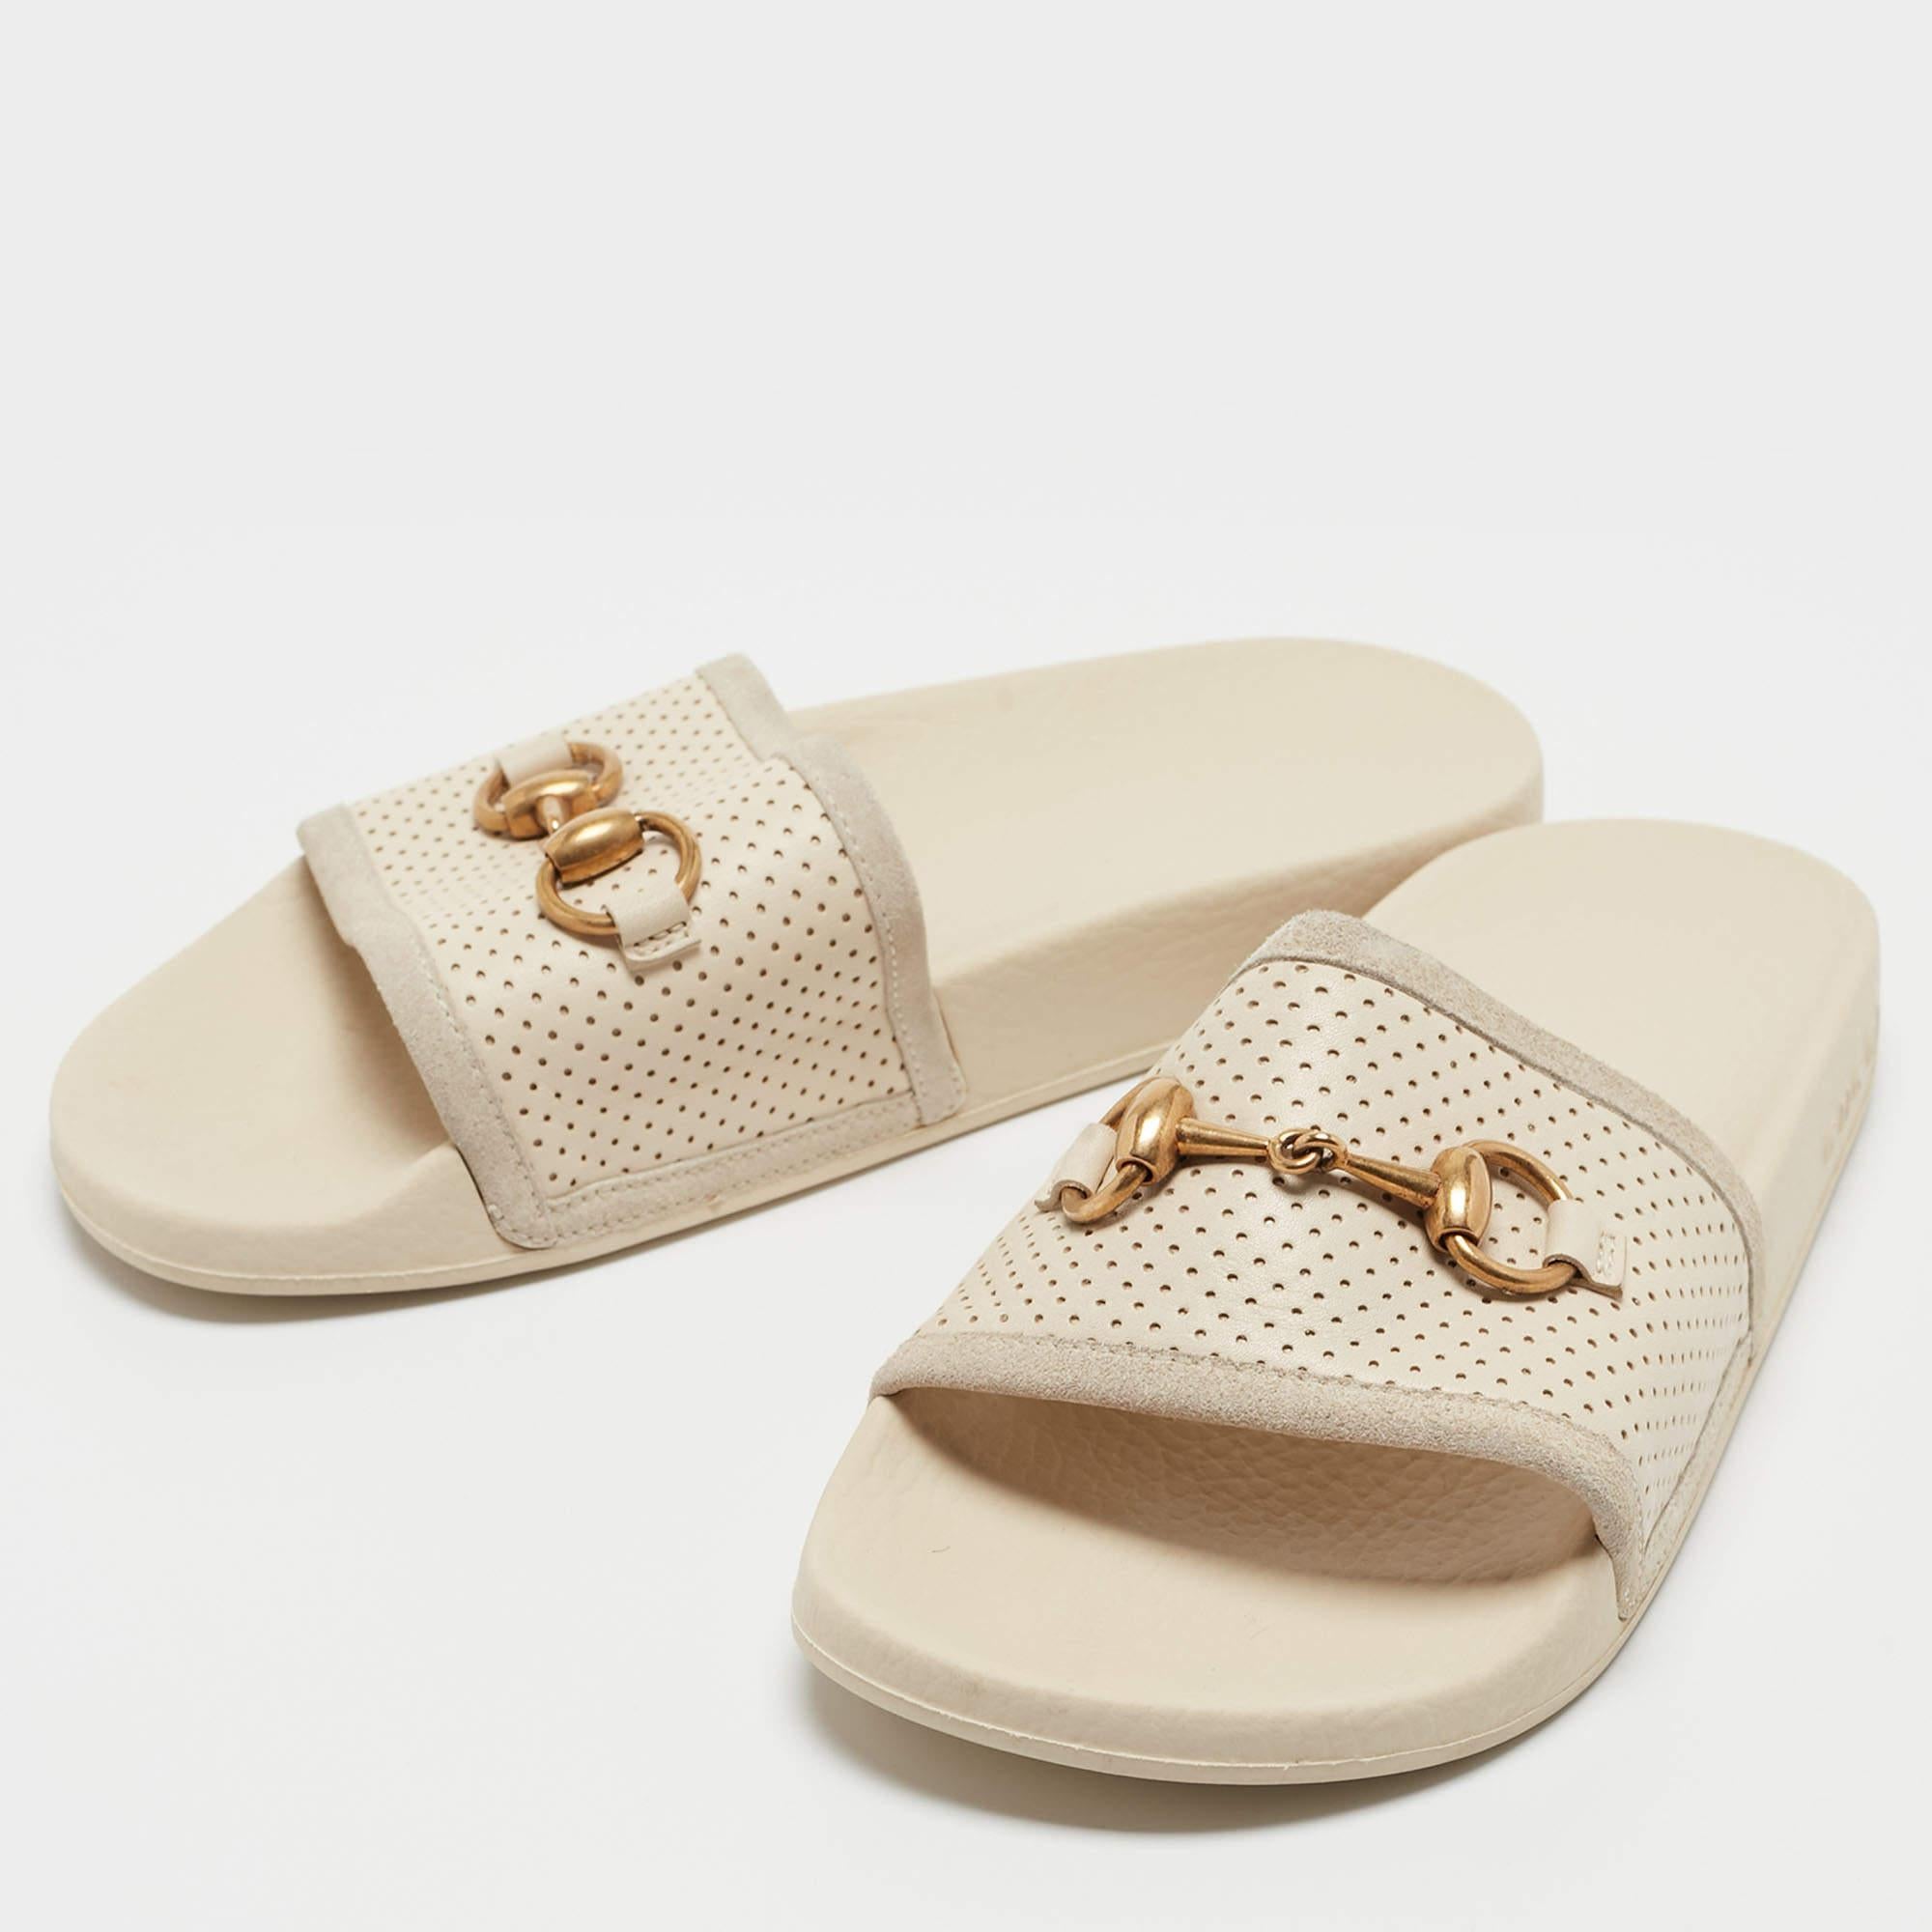 Comfort and style come together with these slide sandals from Gucci! The grey slides are crafted from suede and feature an open toe silhouette. They flaunt the signature Horsebit detail in gold-tone on the vamps and are sure to make your feet very